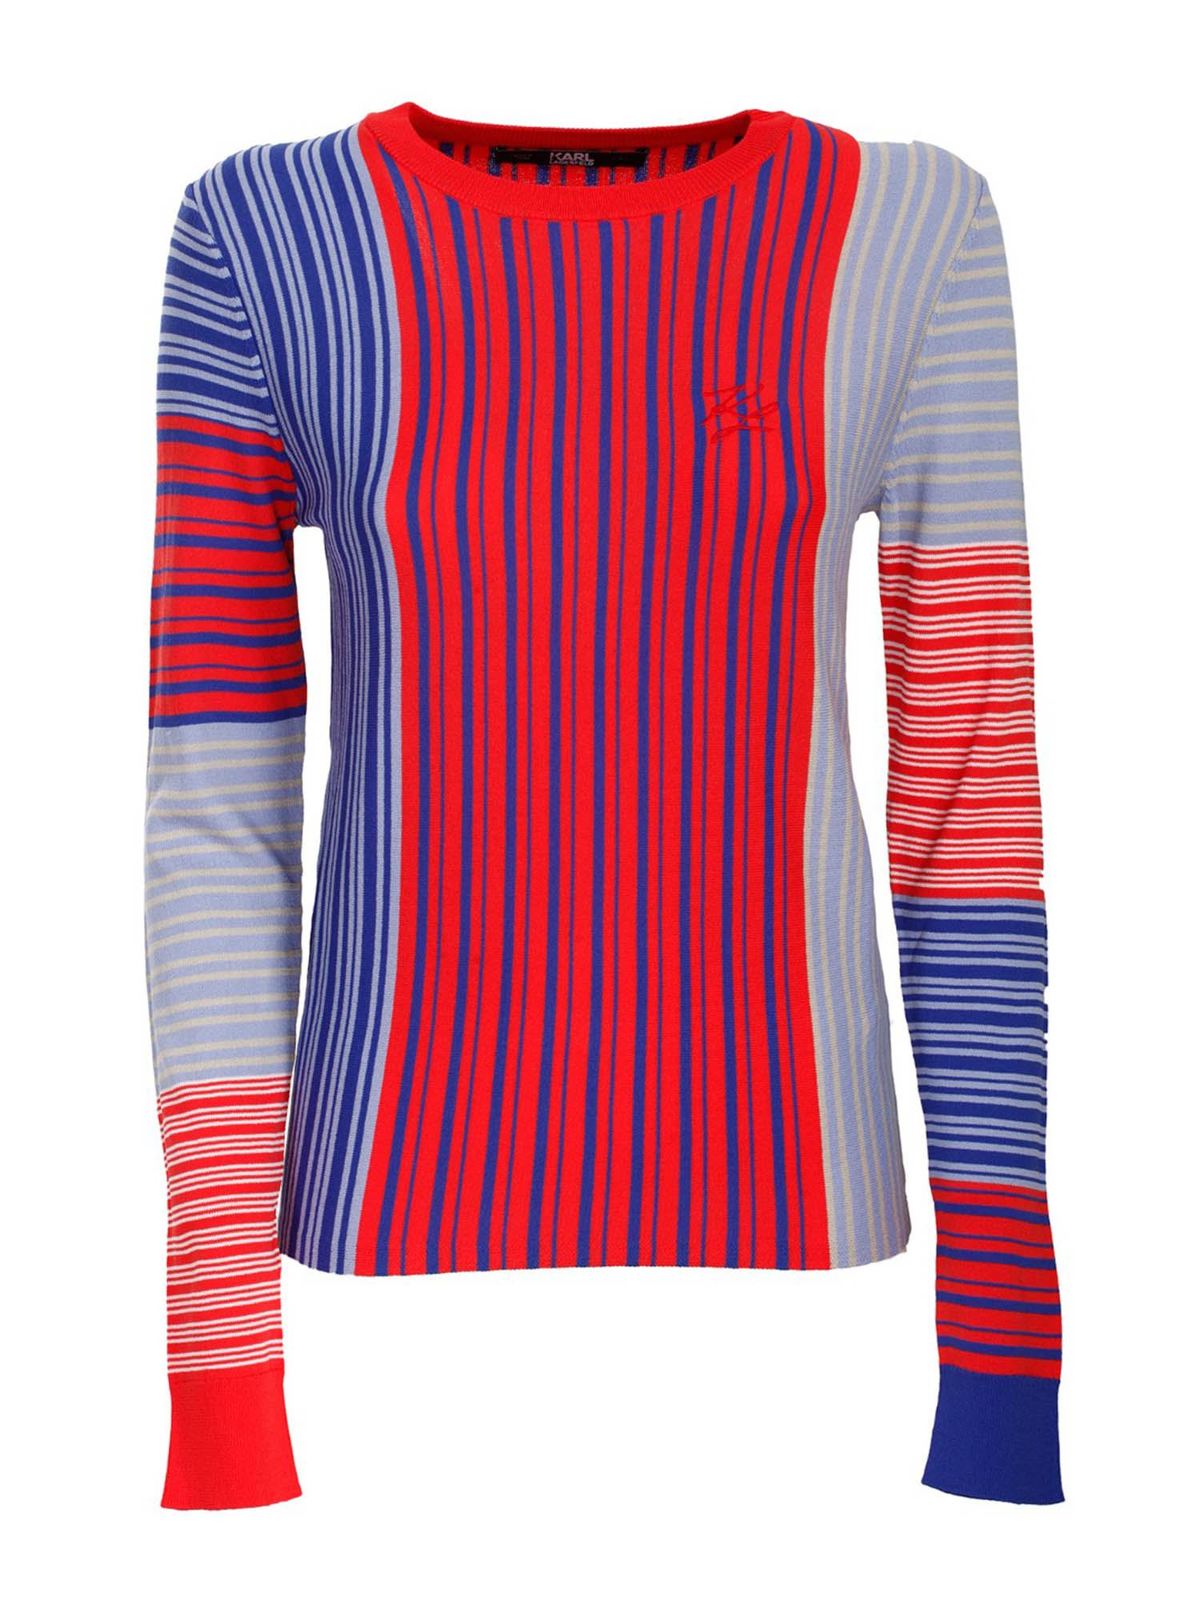 KARL LAGERFELD COLORBLOCK SWEATER IN RED AND BLUE